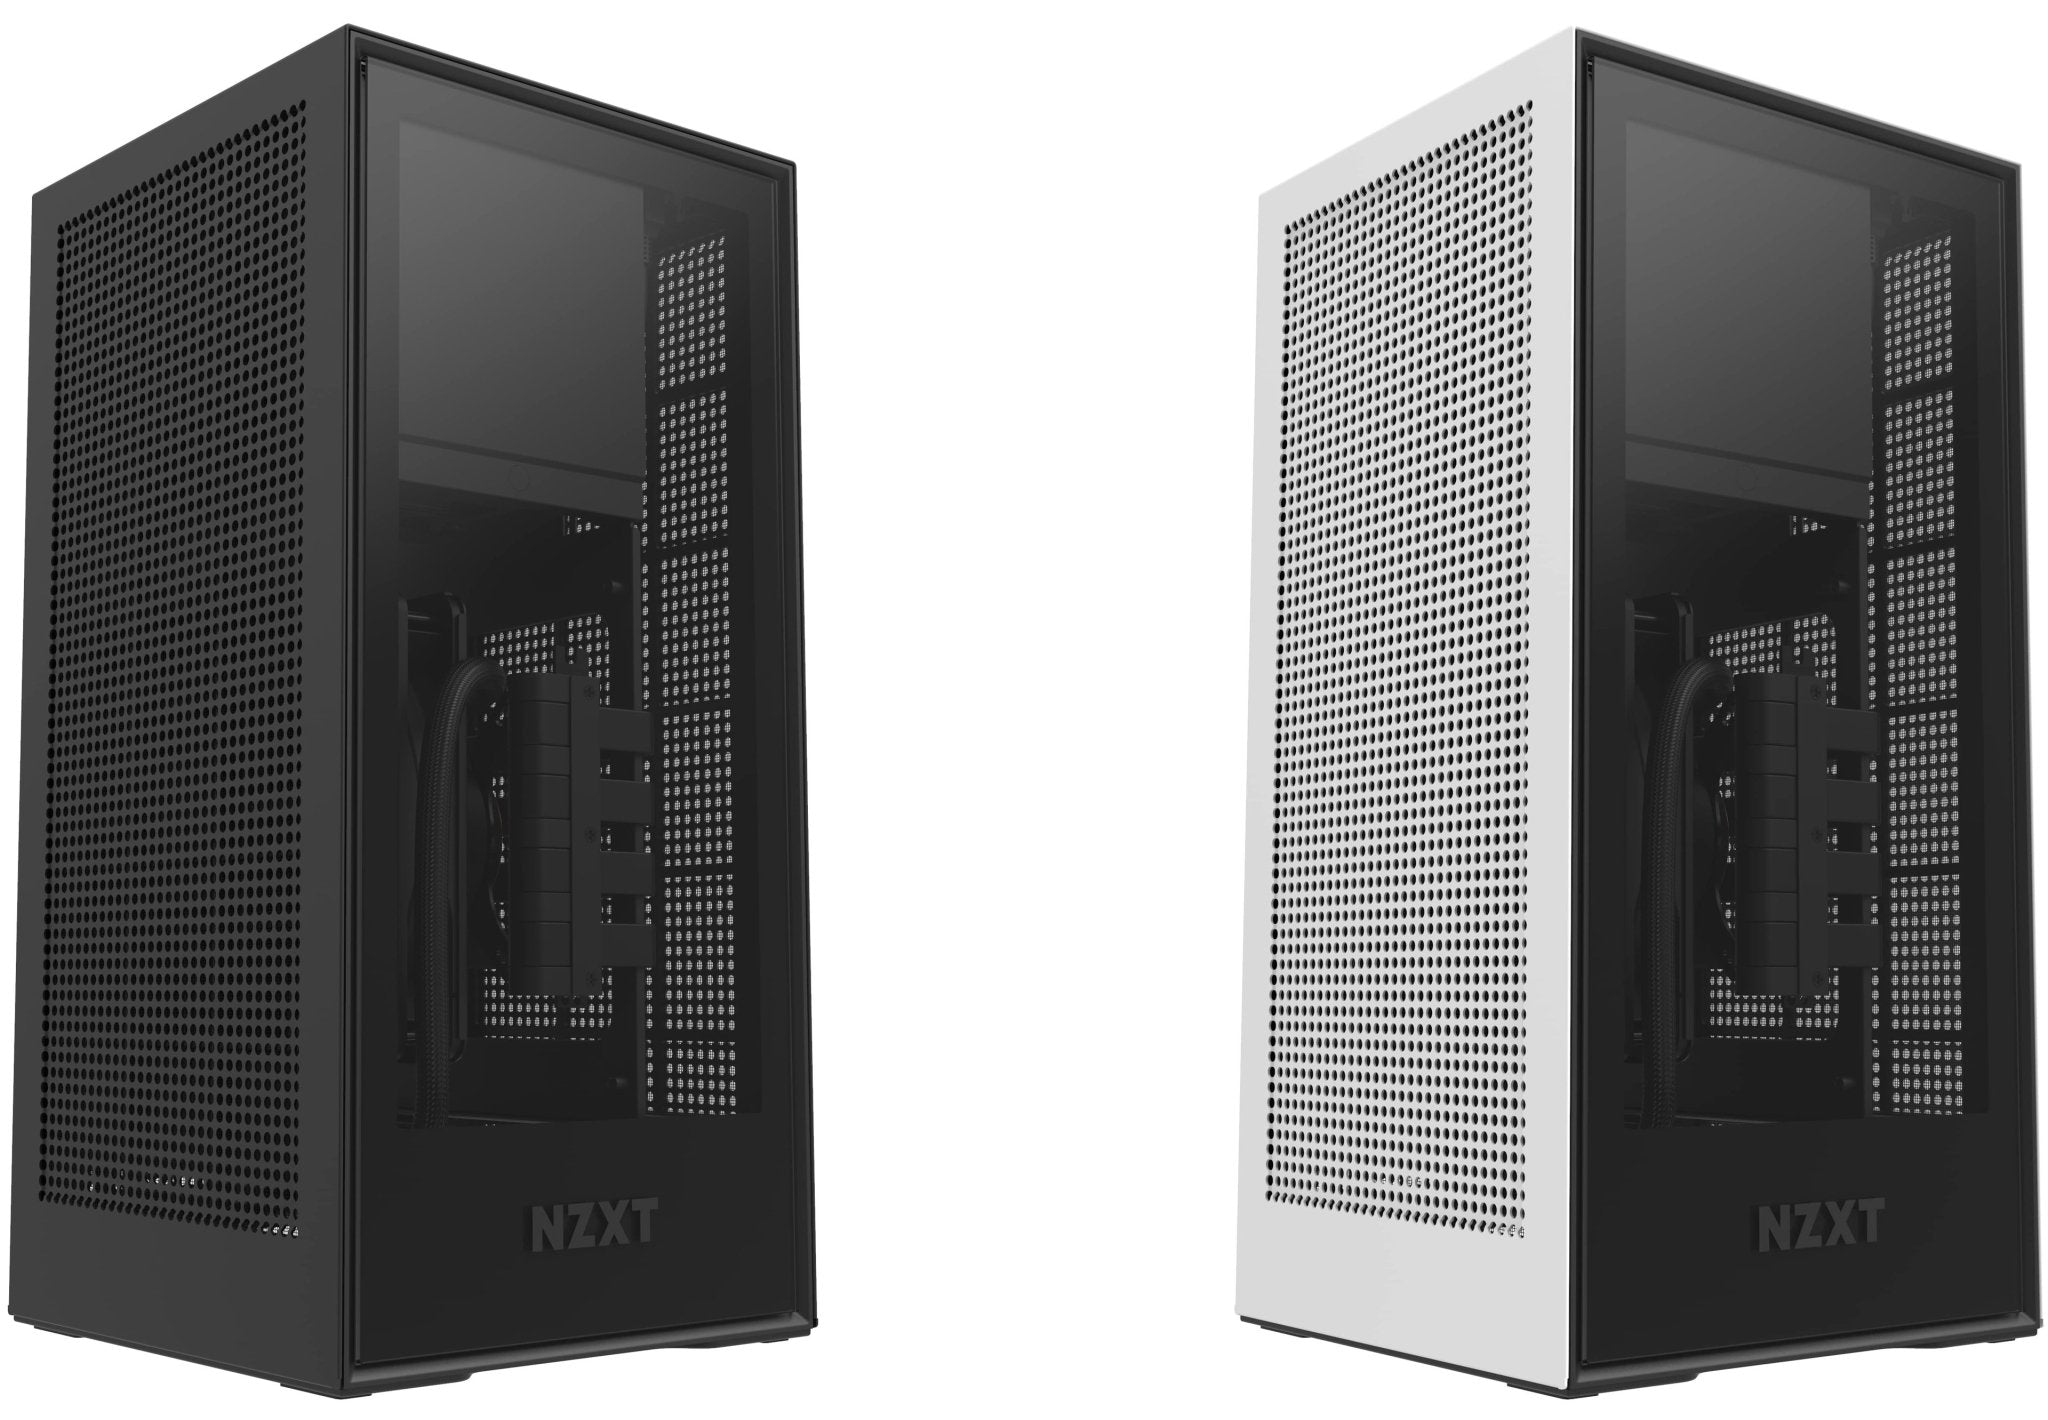 NZXT H1 Black Mini-ITX Small Form Factor Tempered Glass Desktop Computer  Case Reconditioned - CHQstore